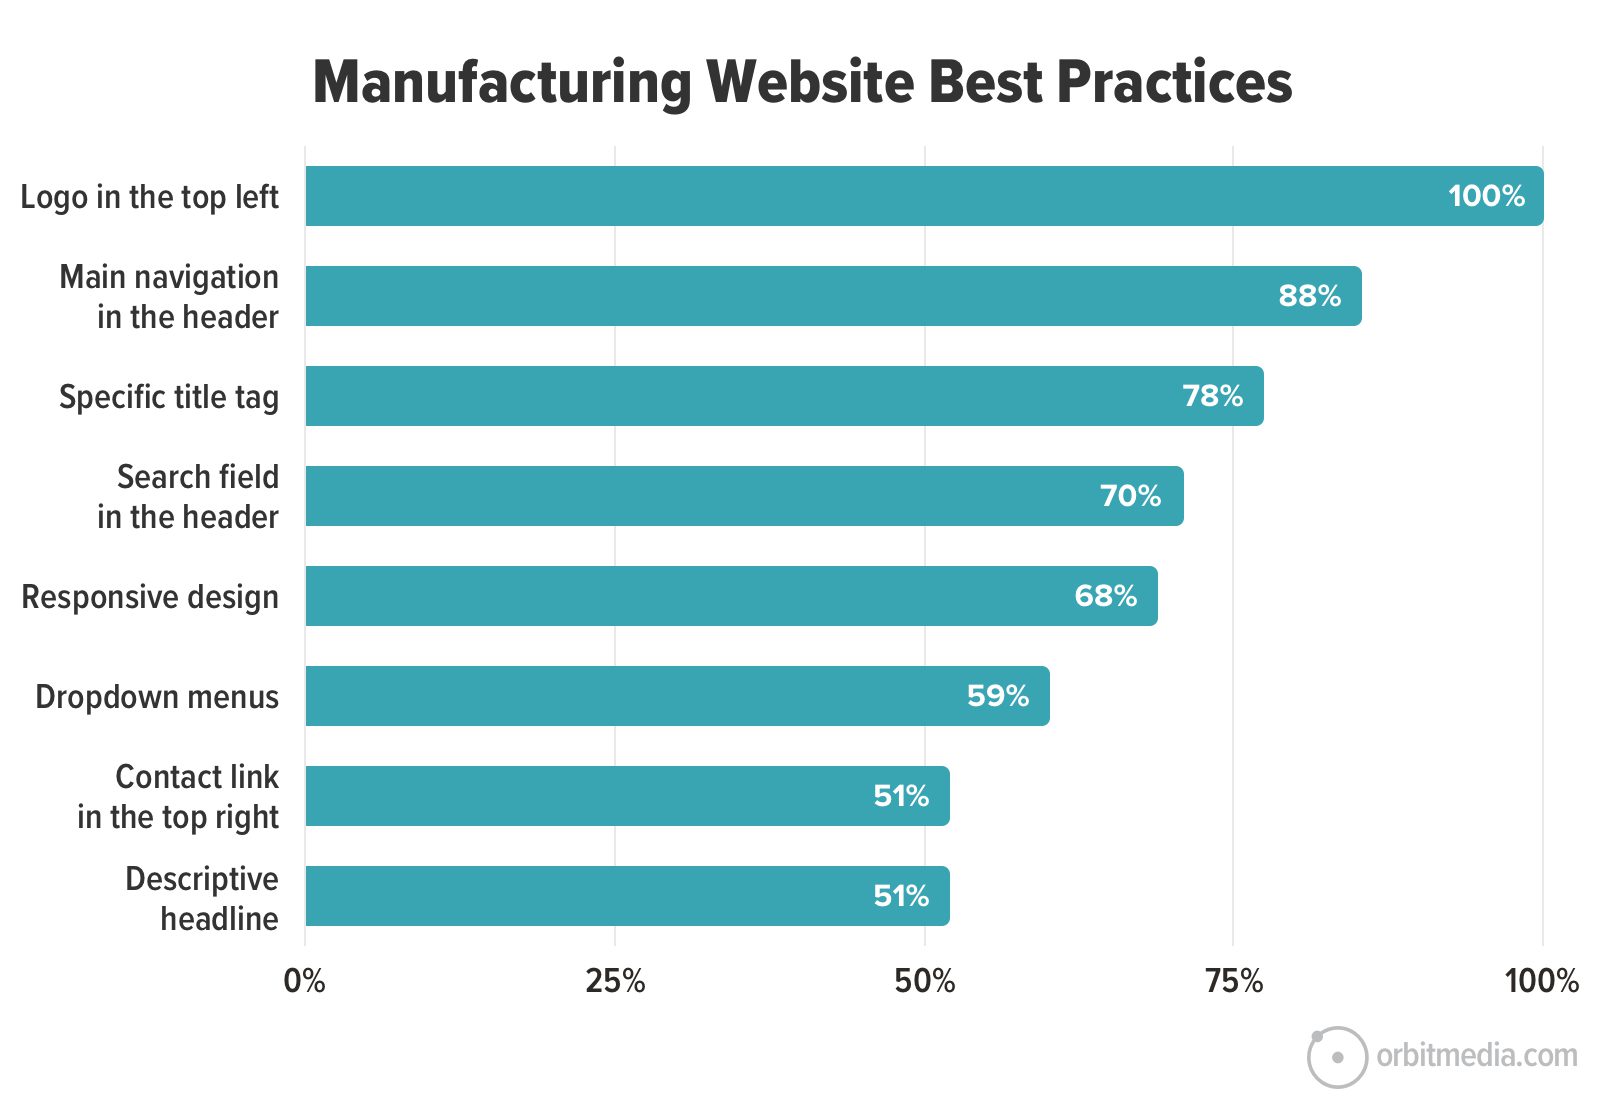 Bar chart displaying manufacturing website best practices 